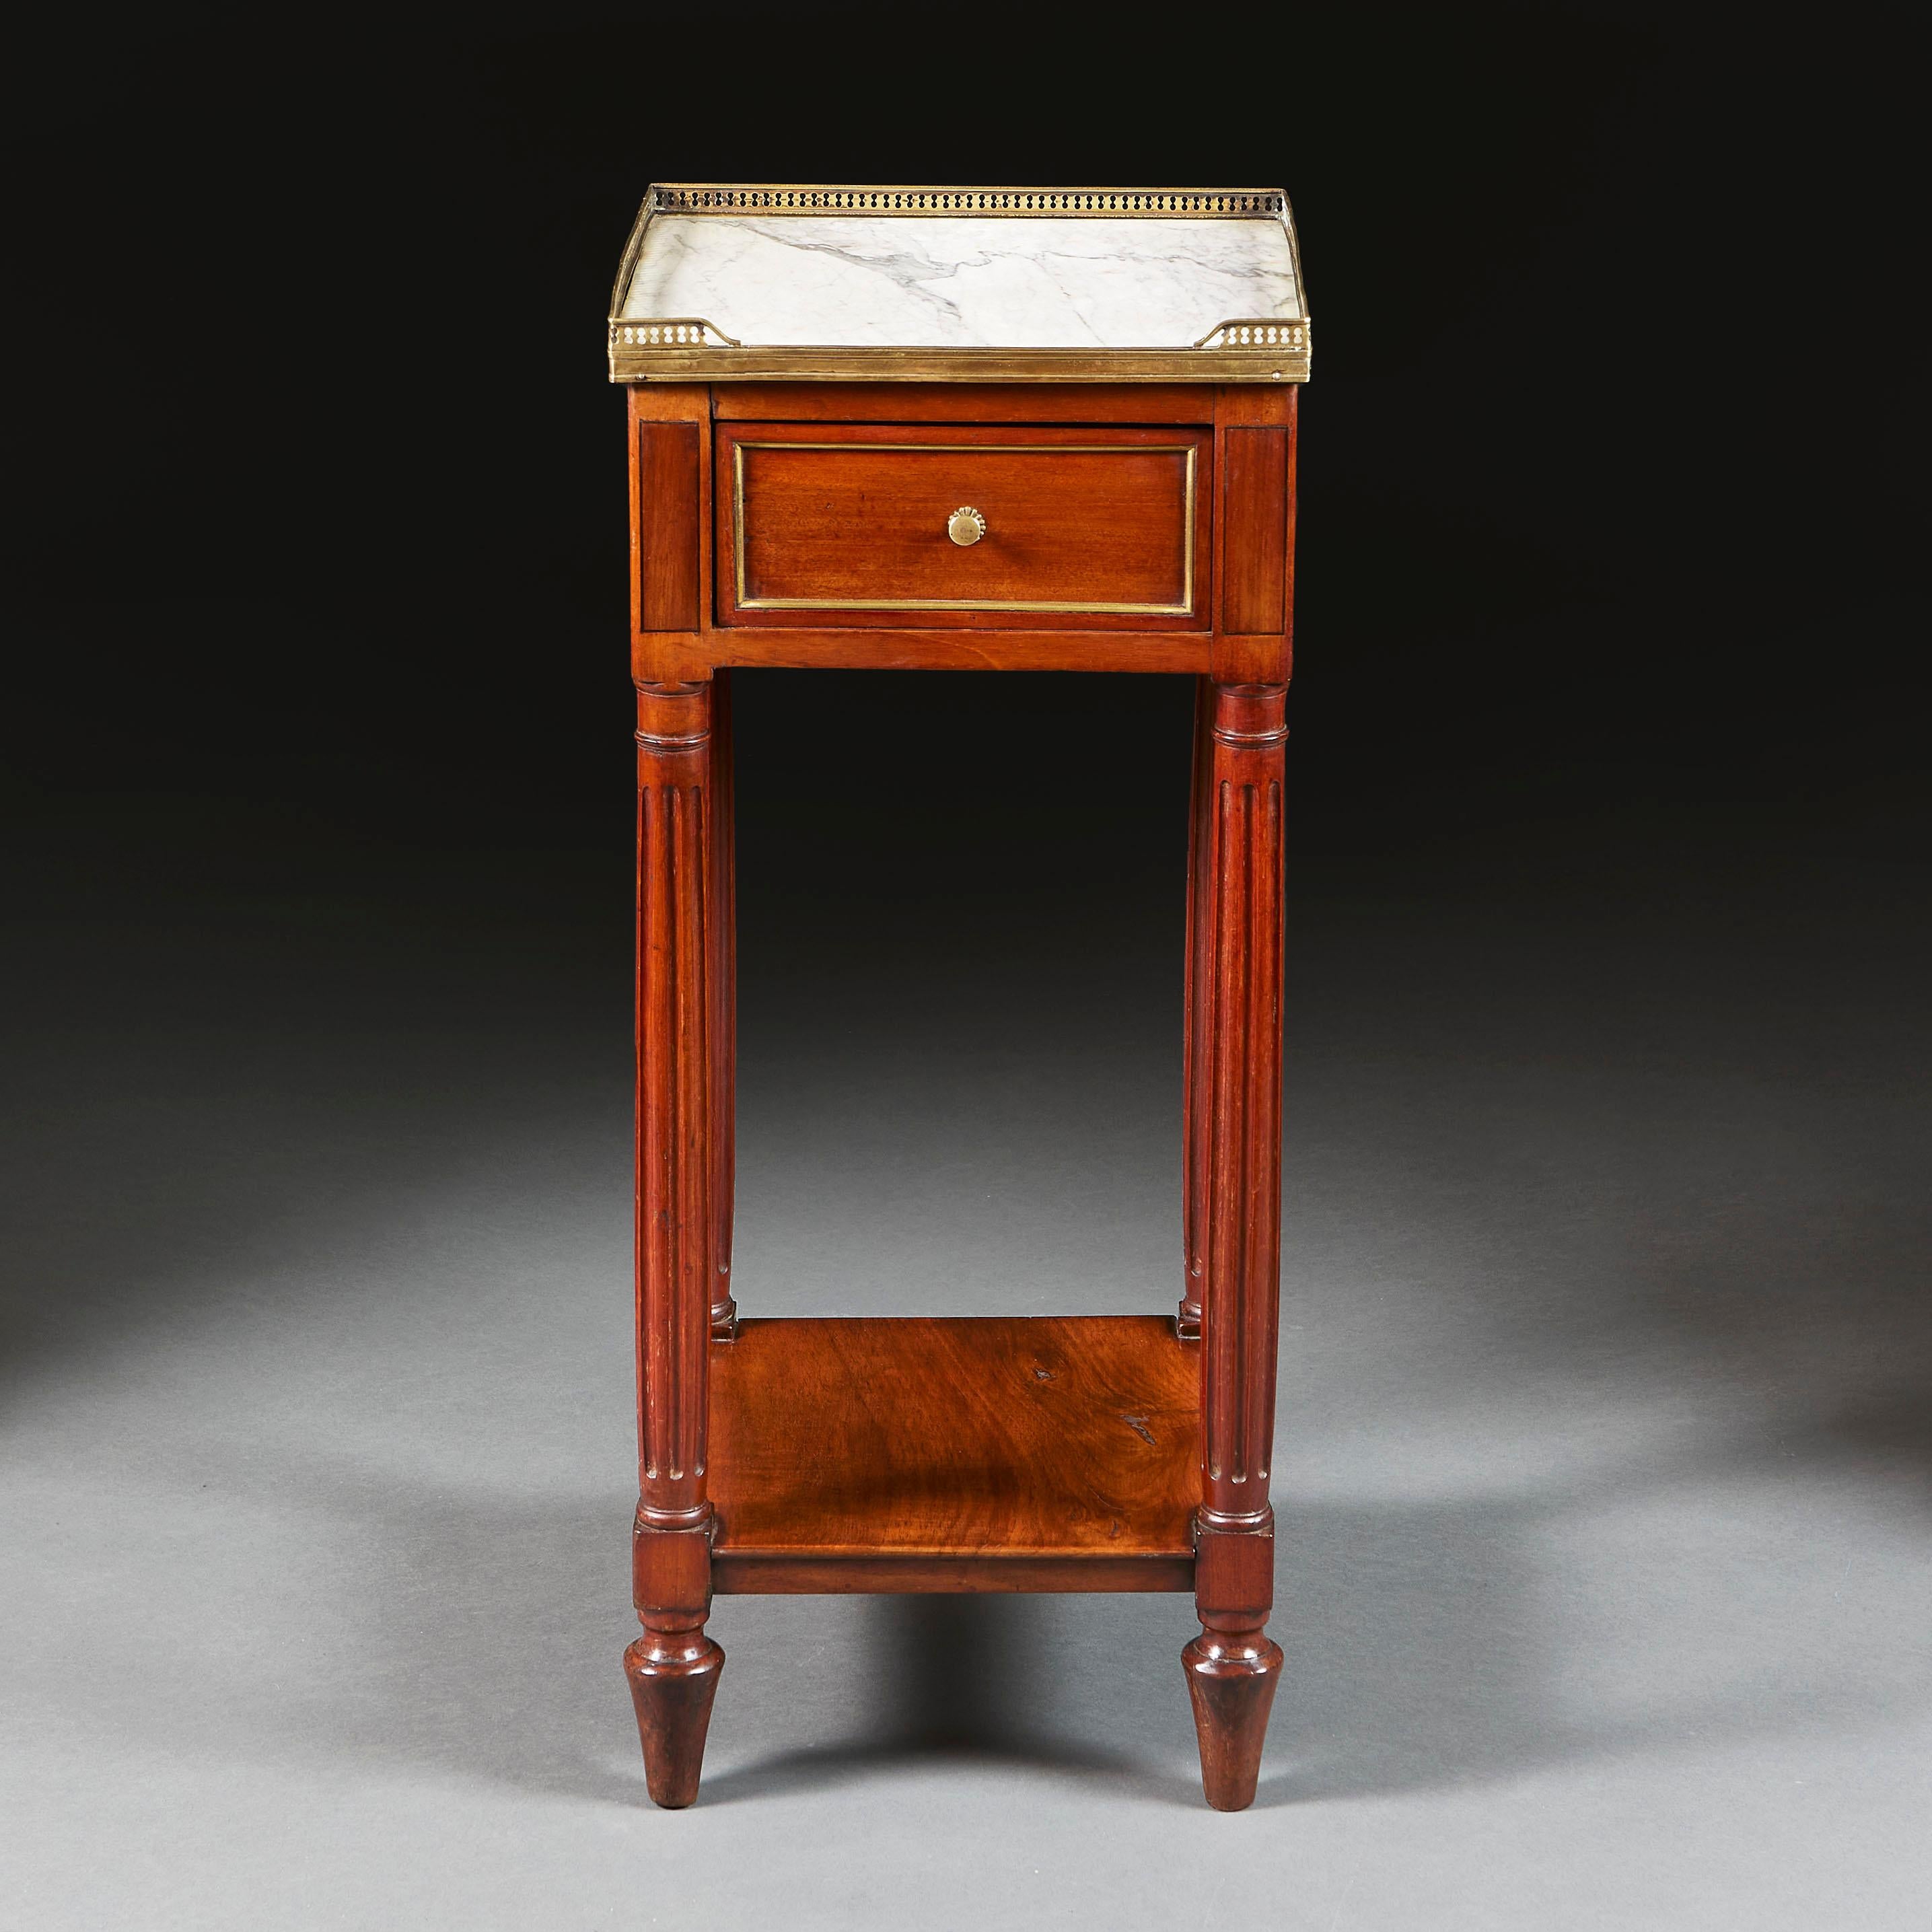 France, circa 1820

An early nineteenth century mahogany bedside table with single drawer to frieze, white marble top surrounded by brass gallery, all supported on fluted cylindrical tapering legs.

Height 82.00cm
Width 35.00cm
Depth 35.00cm

